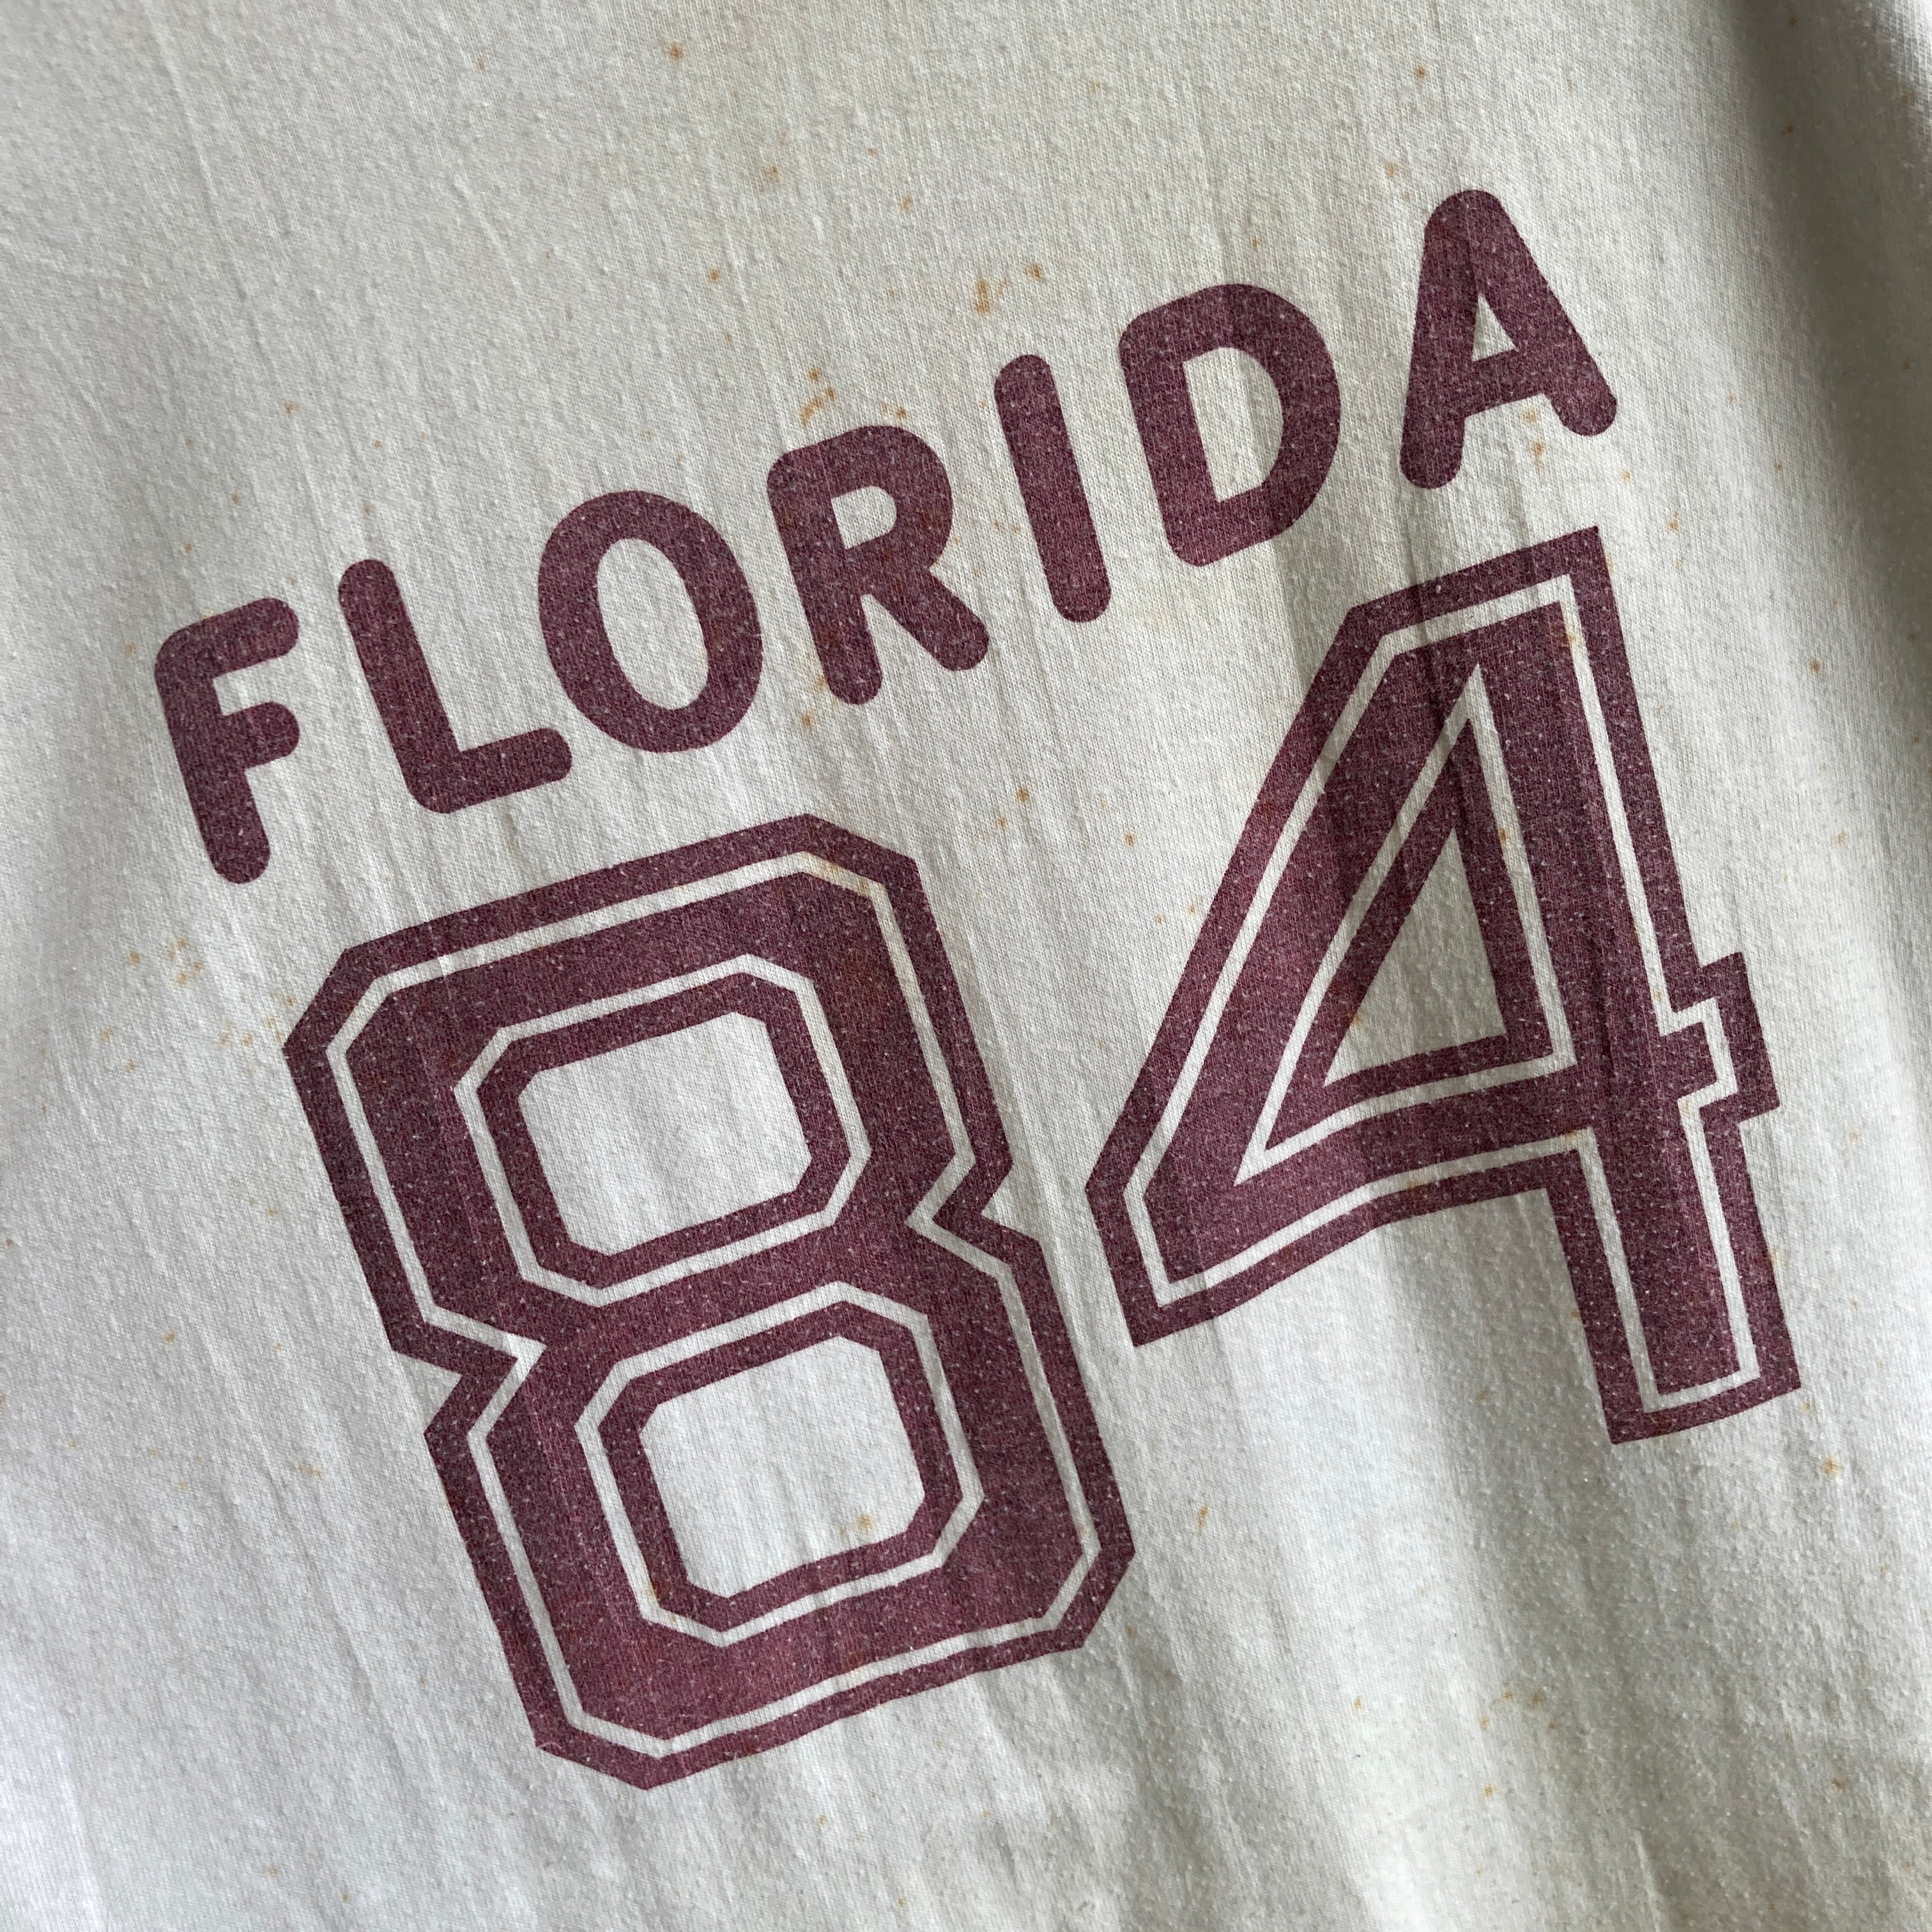 1984 Rust Stained Florida Baseball T-Shirt